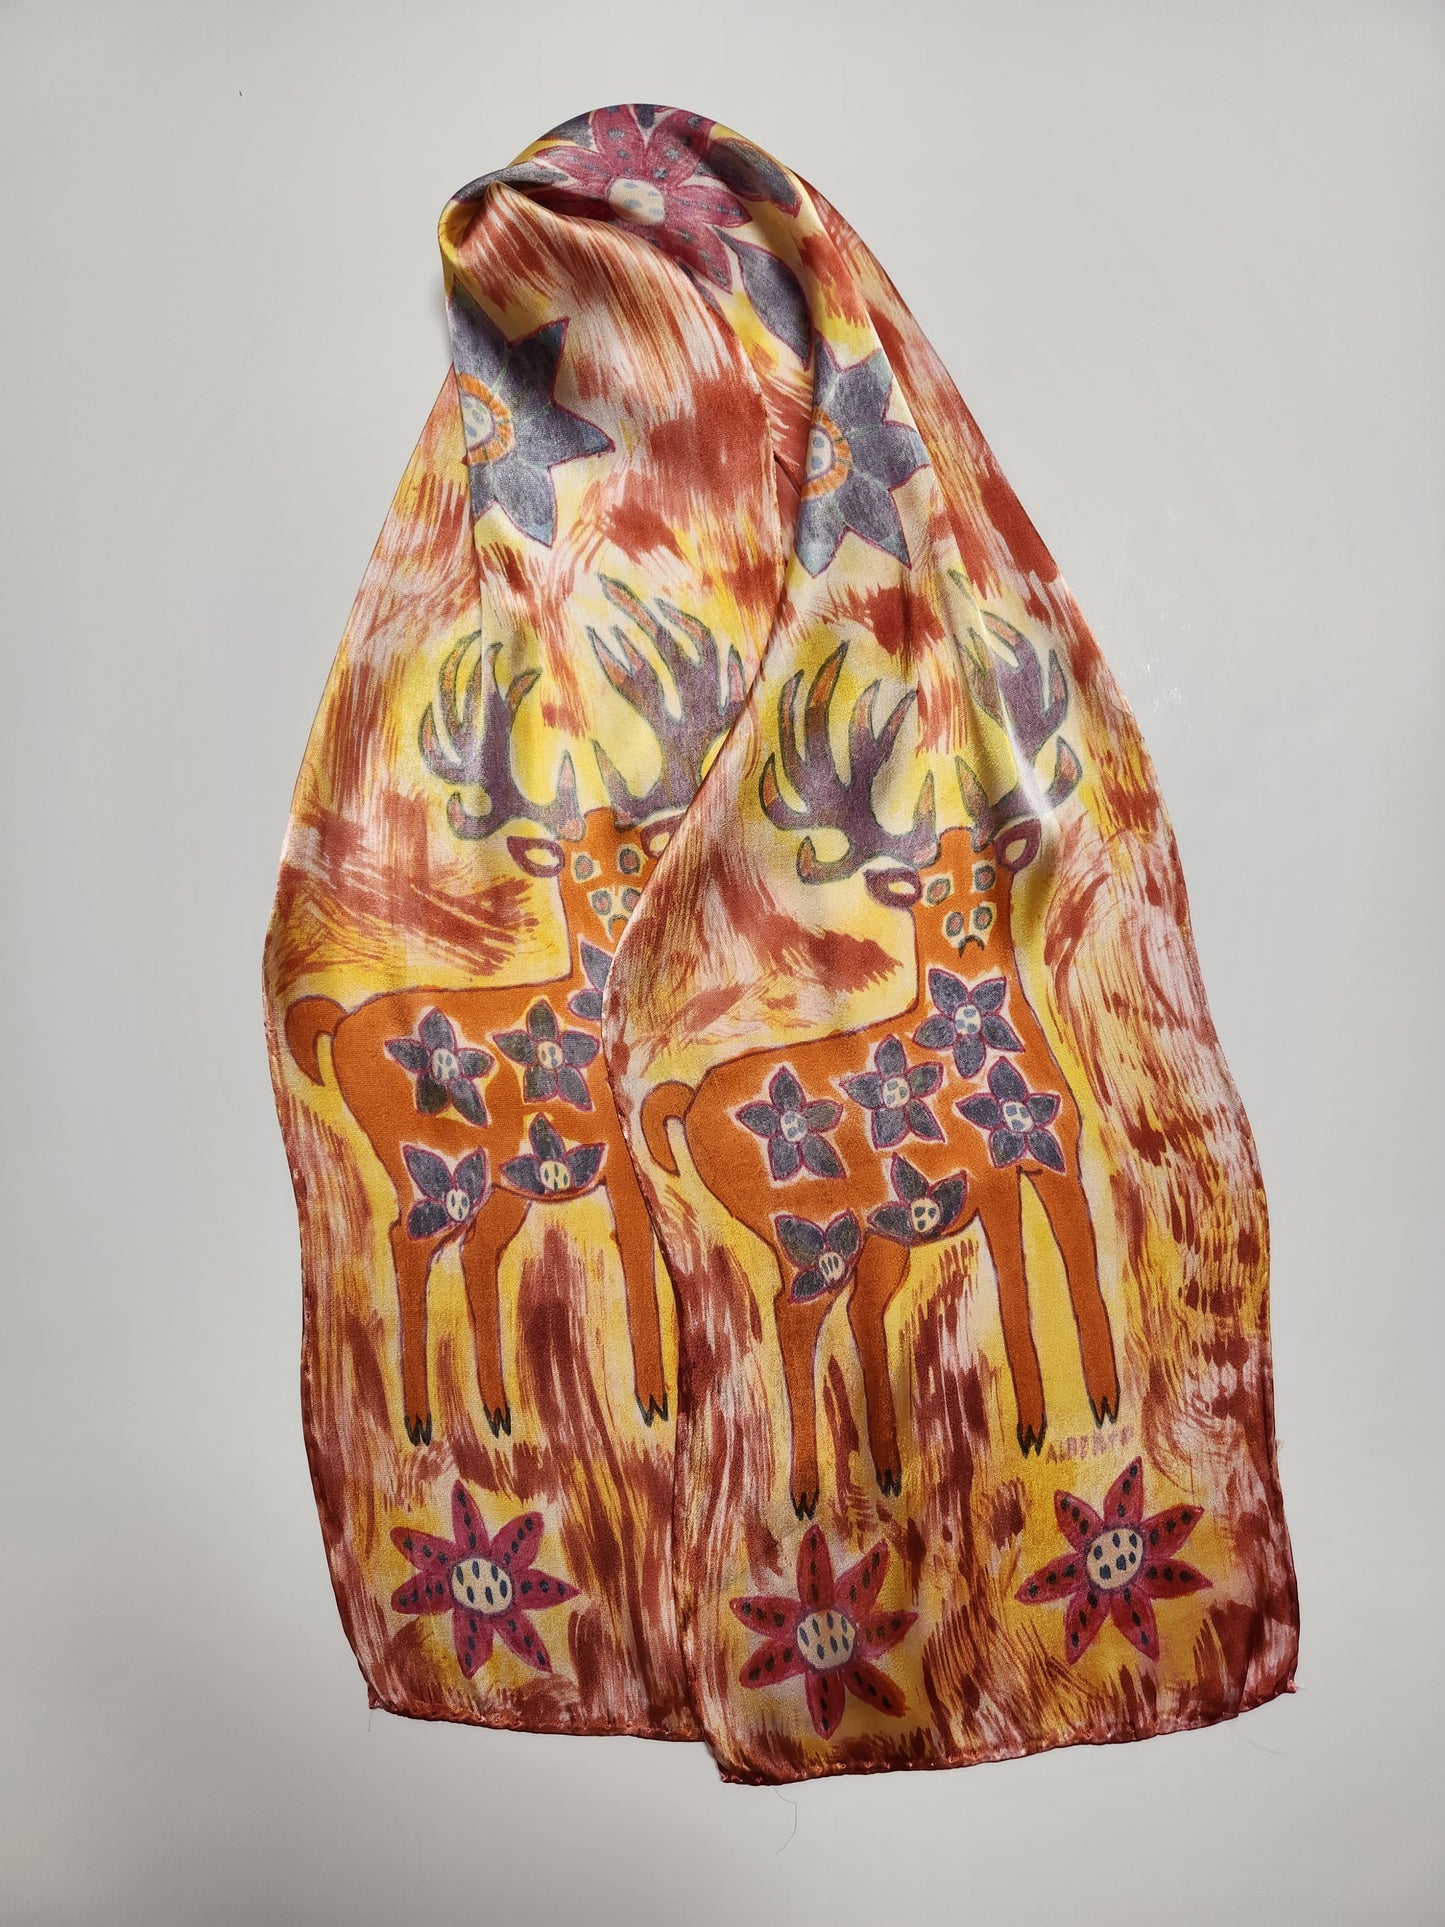 " Deer" Peruvian Art Rayon Silk Scarf Artist: Alberto Alcantara  11" x 58" silk scarf  Hand painted and hand dyed  Orange, purple, golds  Wyoming Deer  Bright  colored flowers  Wonderful scarf for completing a fun outfit